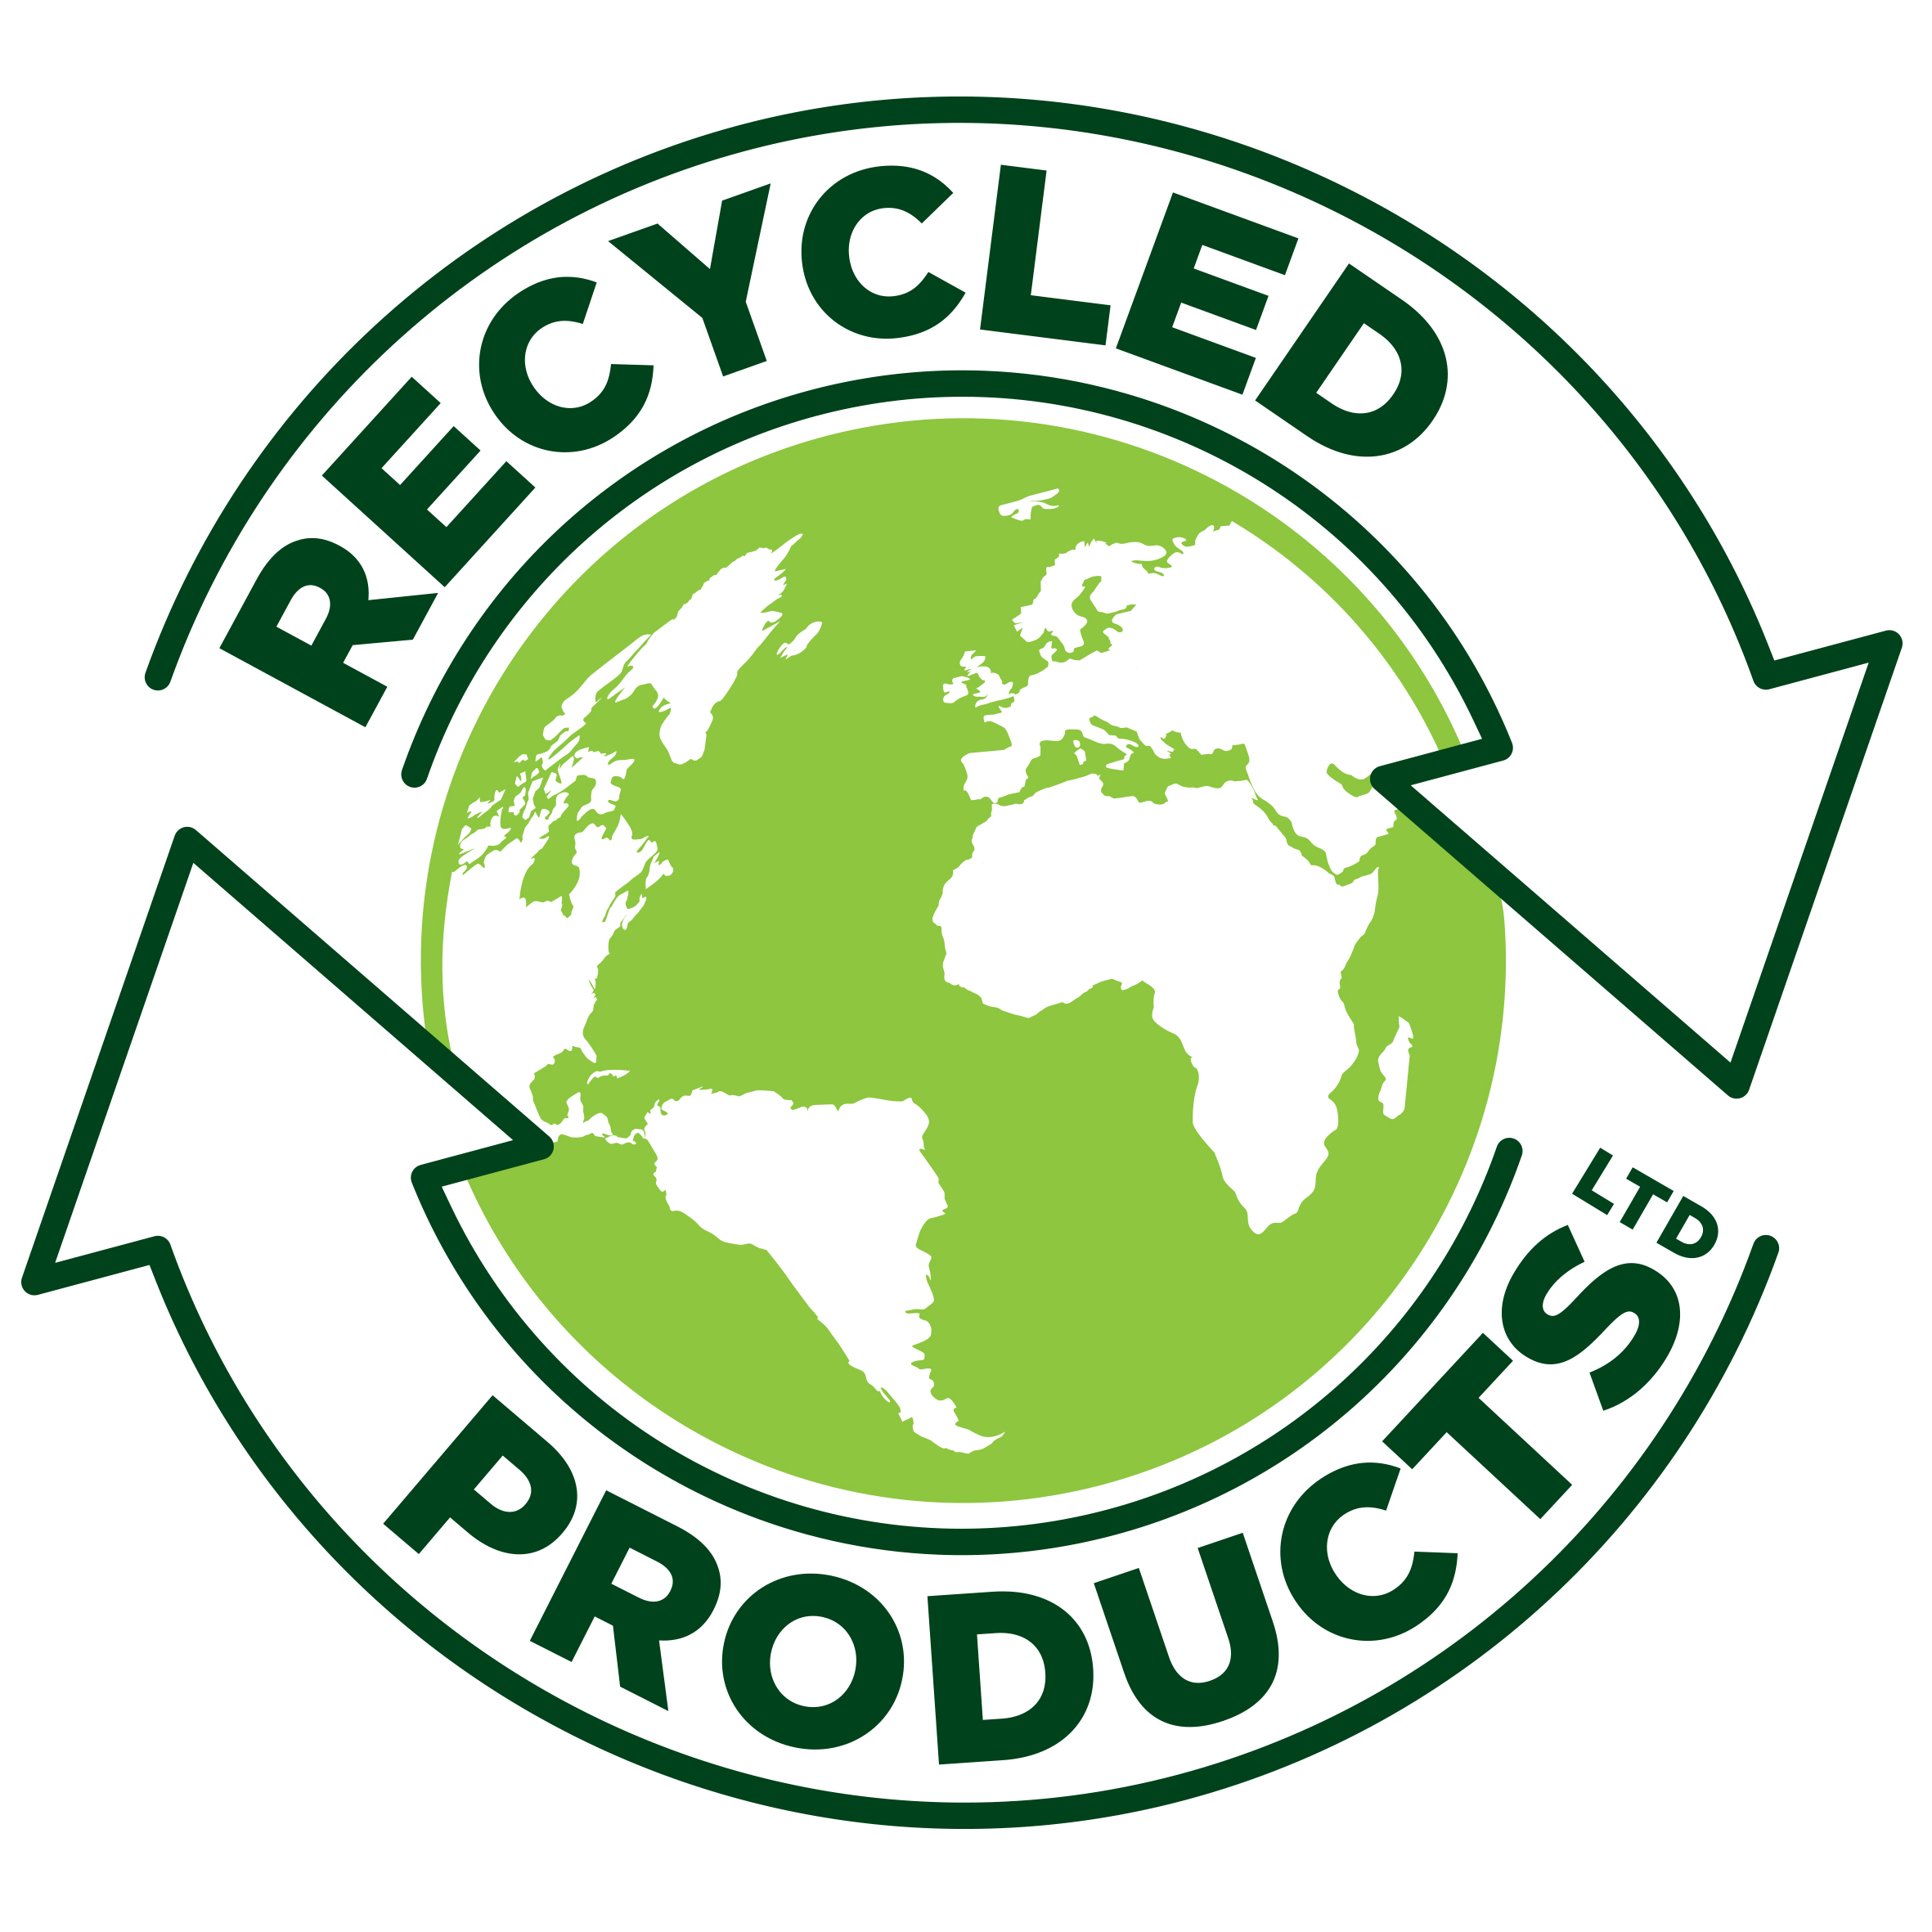 Linked logo for Recycled Products Ltd